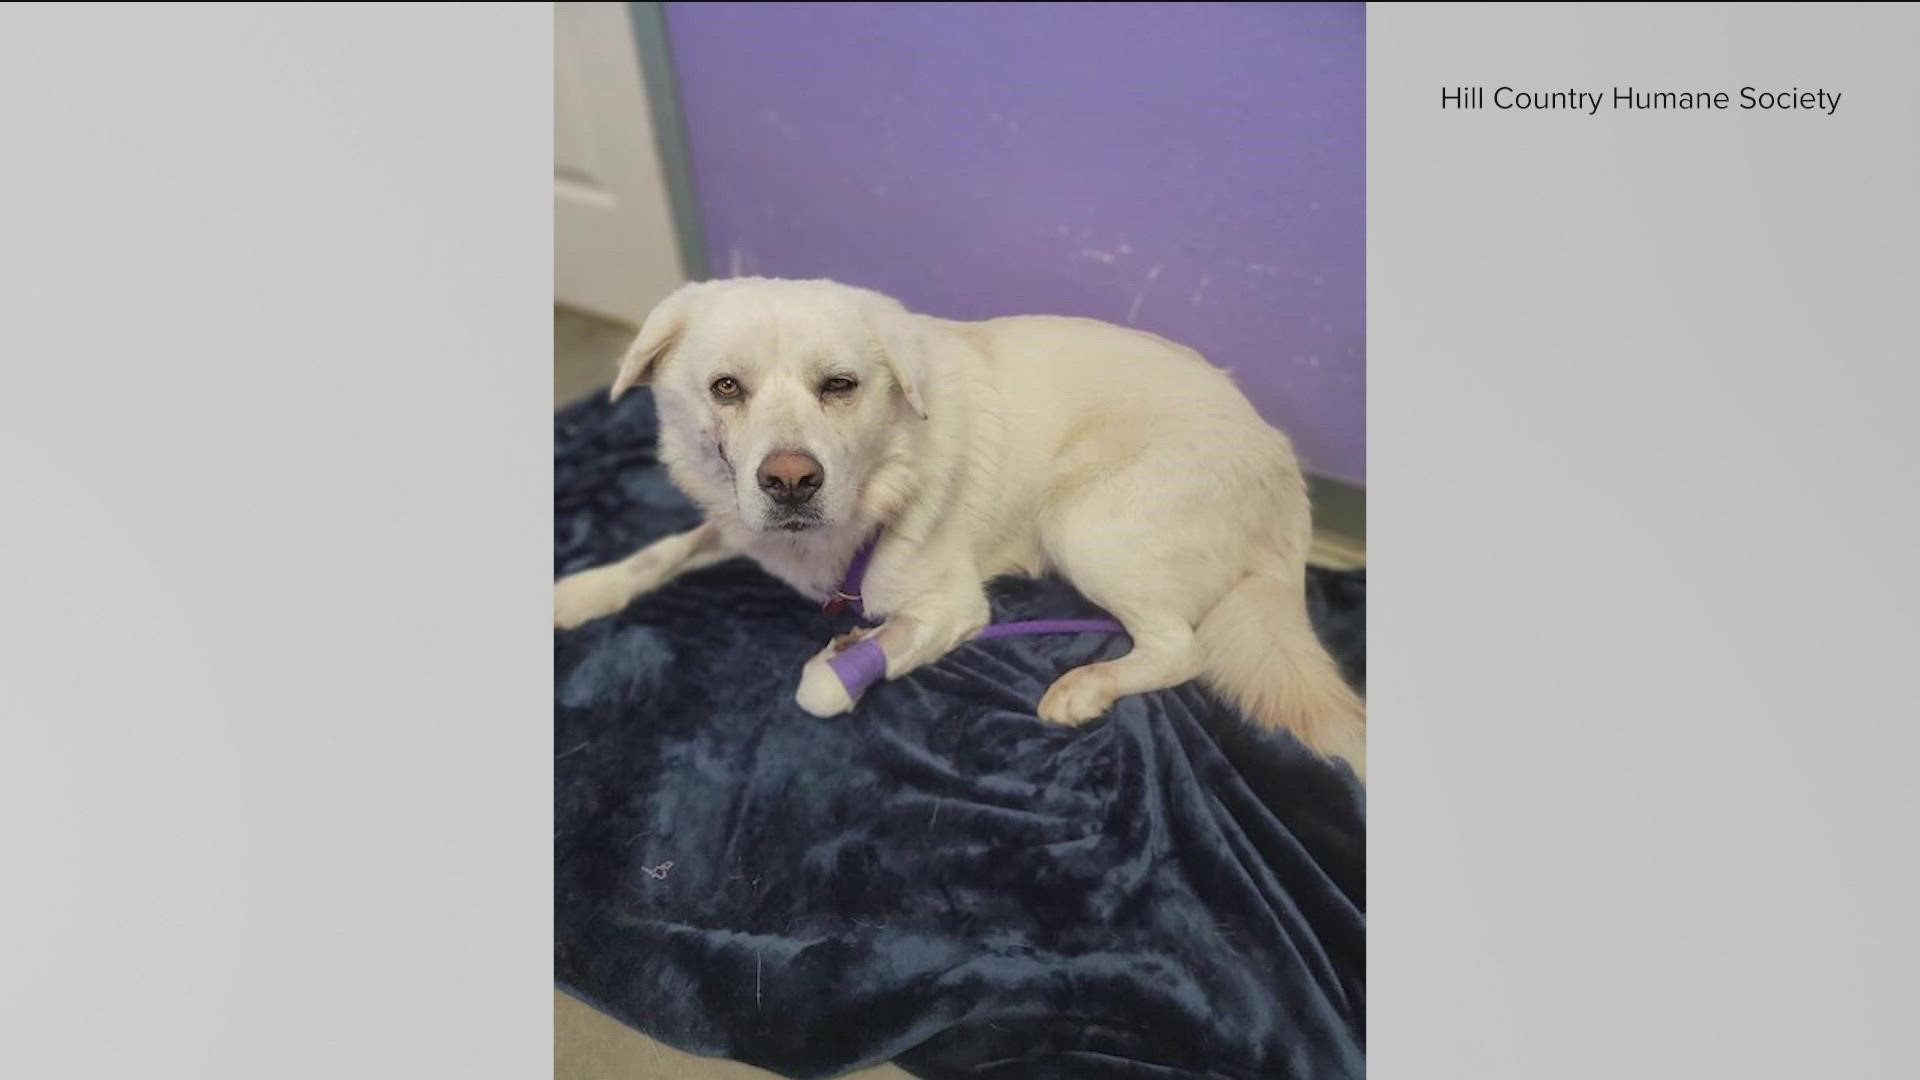 An animal shelter in Llano County is raising money to care for a dog that was shot in the face.